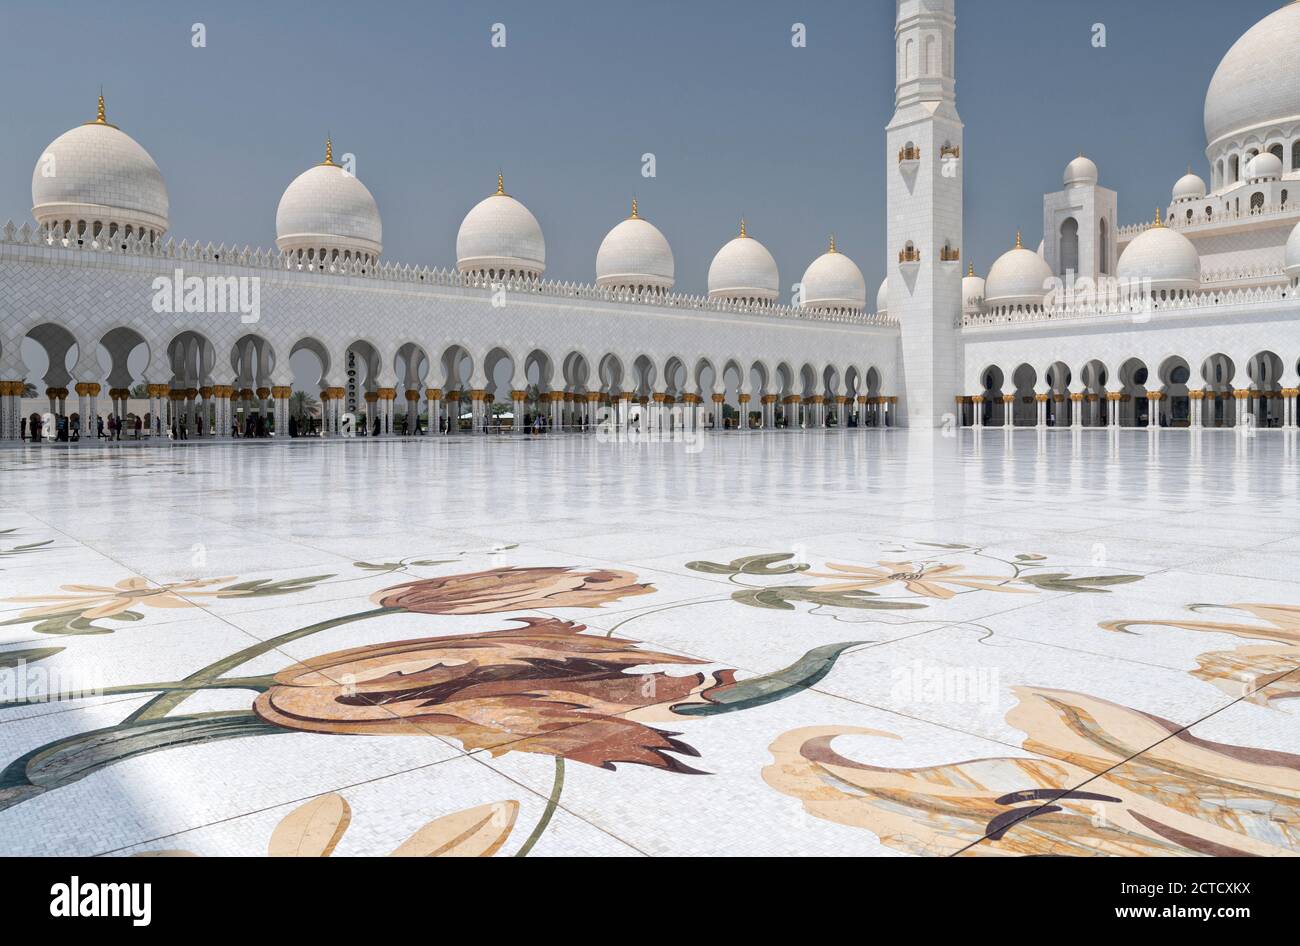 A day shot of the Sheikh Zayed Grand Mosque, Abu Dhabi inner courtyard marble floor with domes, arches and columns. Mosque completed 2007. Stock Photo